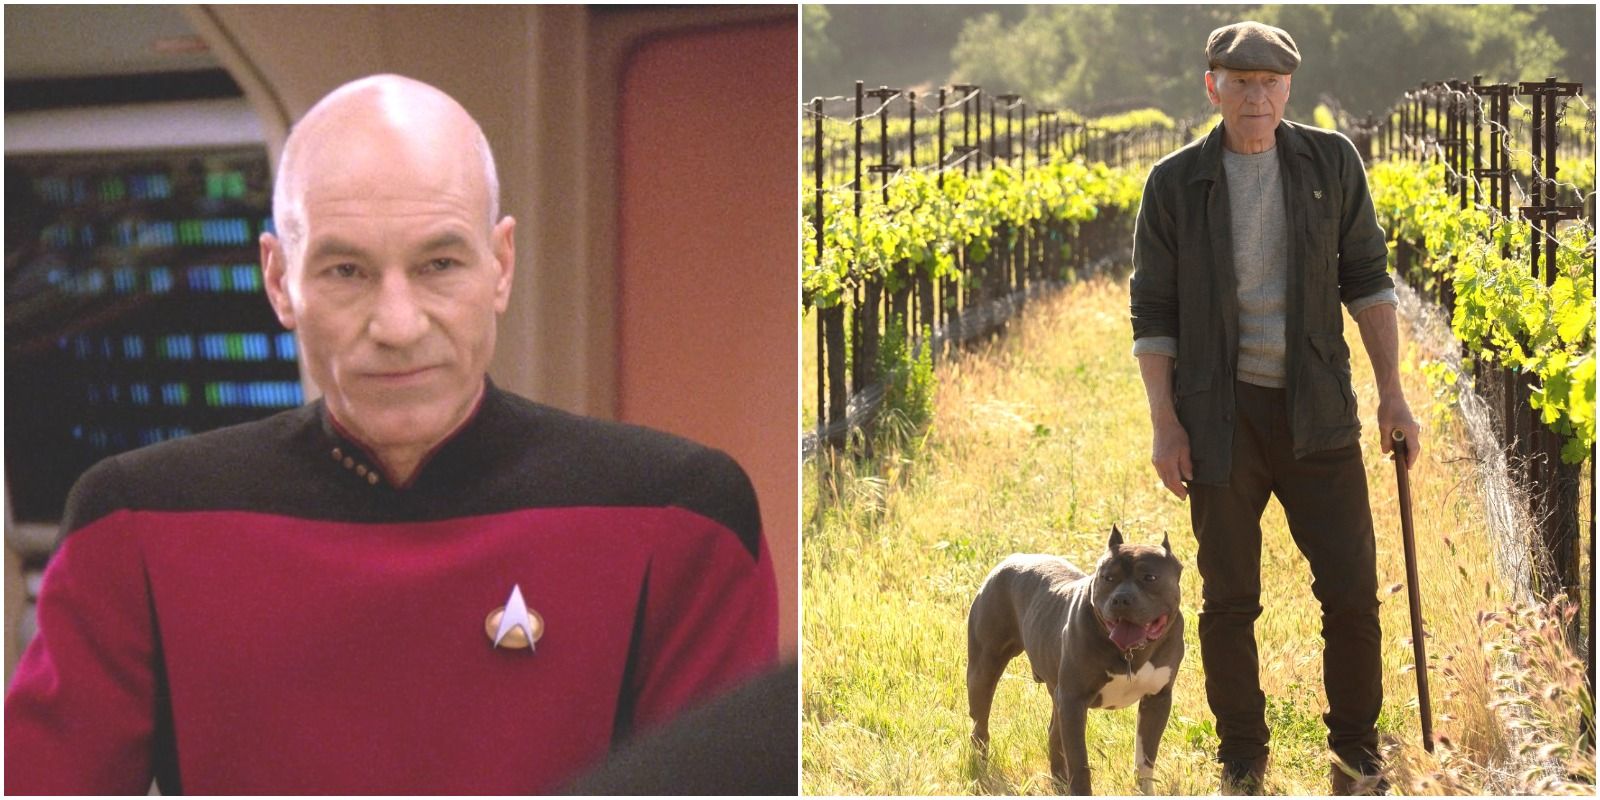 Young Captain Picard on board the Enterprise and old Picard at his vineyard